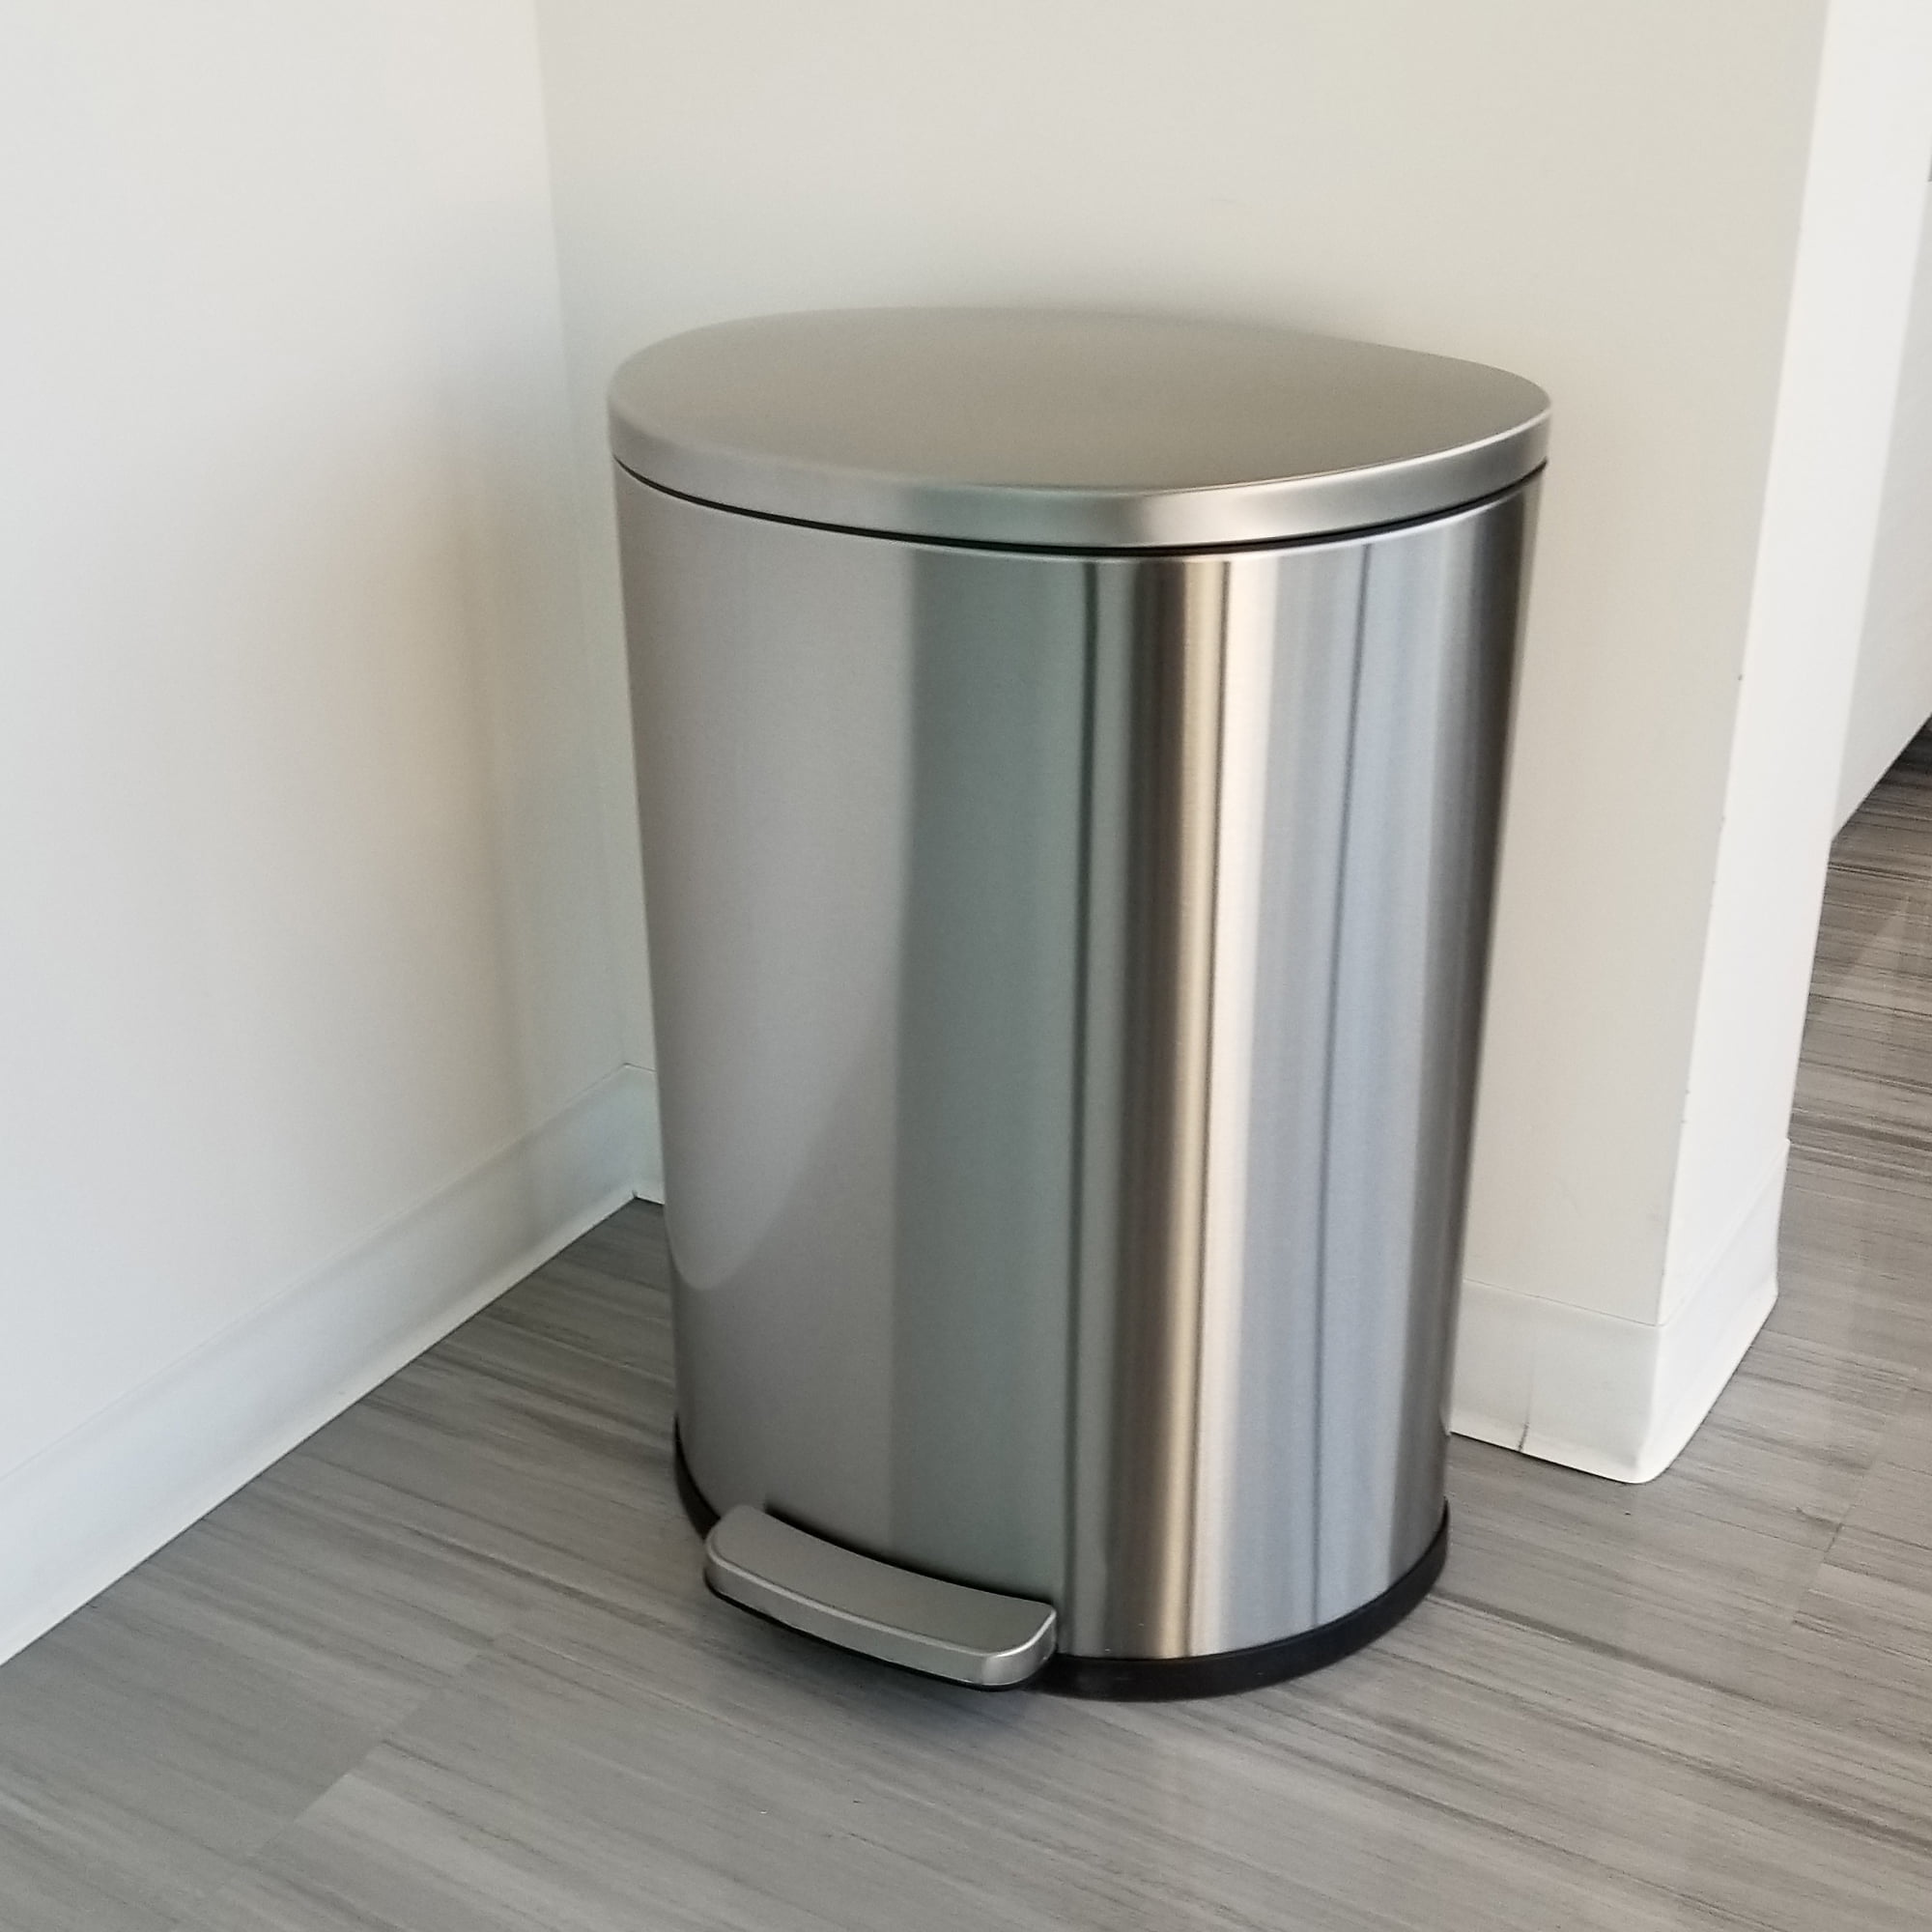 iTouchless SoftStep 1.32 Gallon Small Bathroom Stainless Steel Step Trash  Can, 5 Liter Pedal Bin, Re…See more iTouchless SoftStep 1.32 Gallon Small